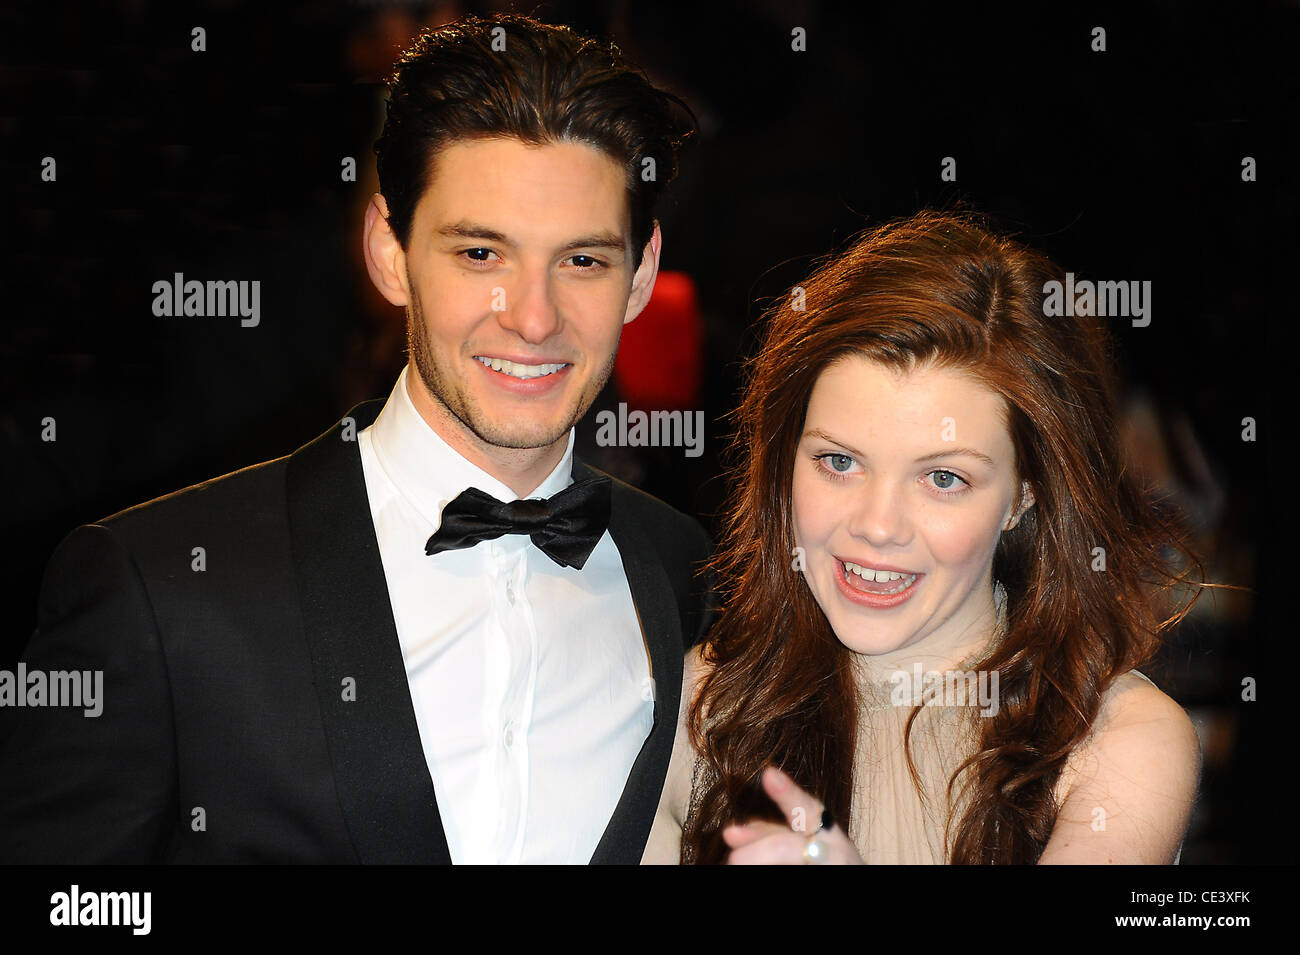 Georgie Henley and Ben Barnes The Royal Premiere of The Chronicles of Narnia: The Voyage of the Dawn Treader at the Odeon Leicester Square.  London, England - 30.11.10 Stock Photo